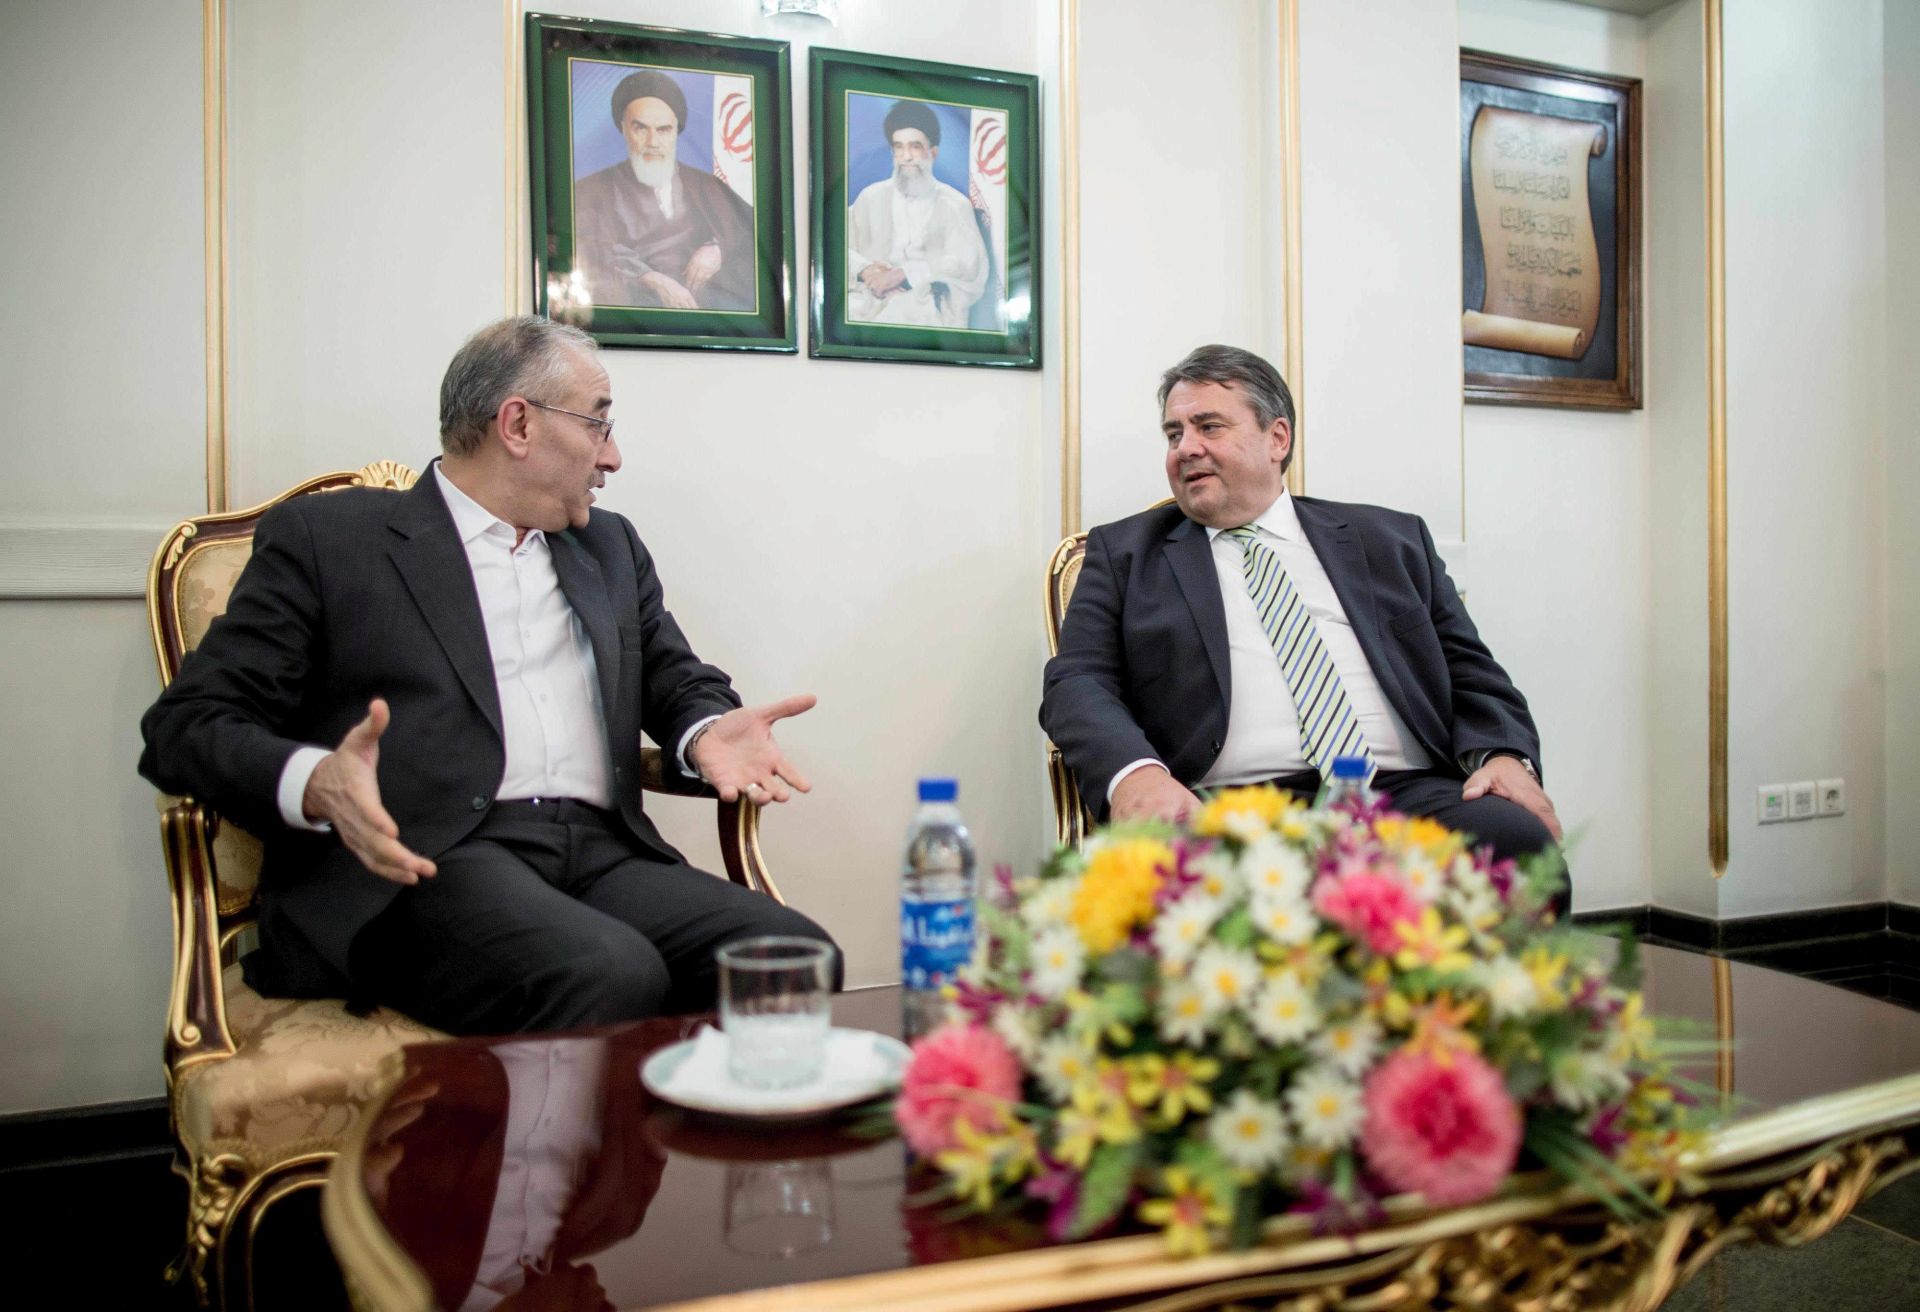 epa04853238 German Minister for Economy Sigmar Gabriel (R) speaks with Iranian Vice Minister for Oil, Amit Hossein (L), in Tehran, Iran, 19 July 2015. Gabriel is on a three-day trip to Iran after the completion of the nuclear negotiations to discuss possible economic relations.  EPA/MICHAEL KAPPELER